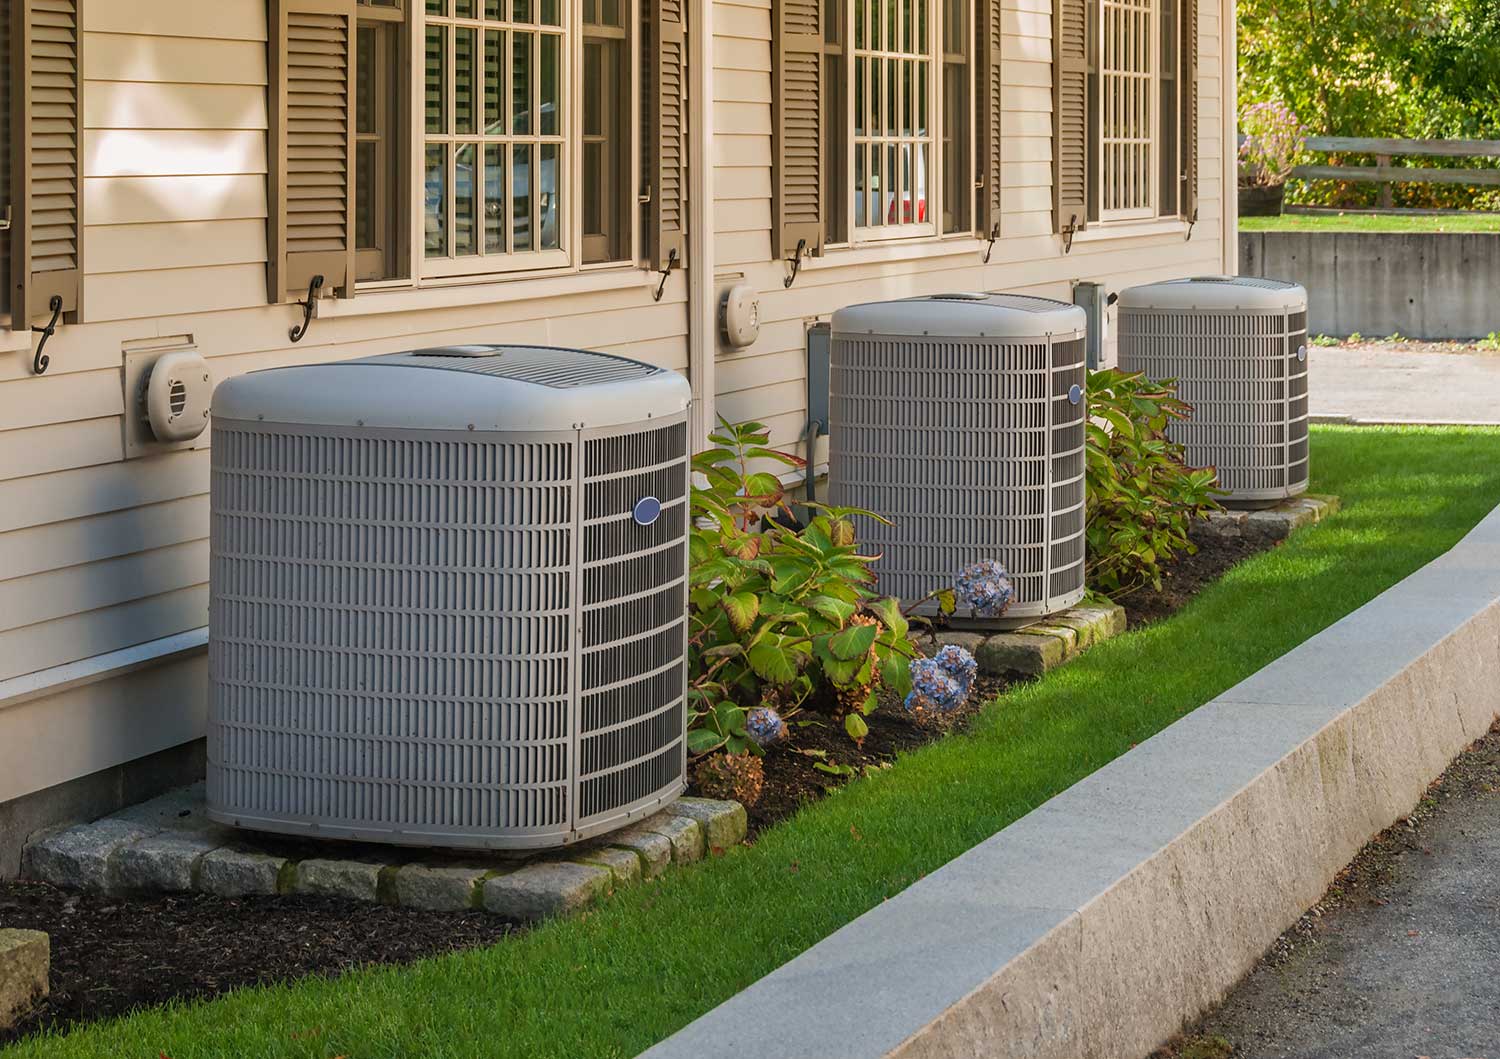 Husband installs Heating as well as A/C systems all day, separate from any A/C for himself